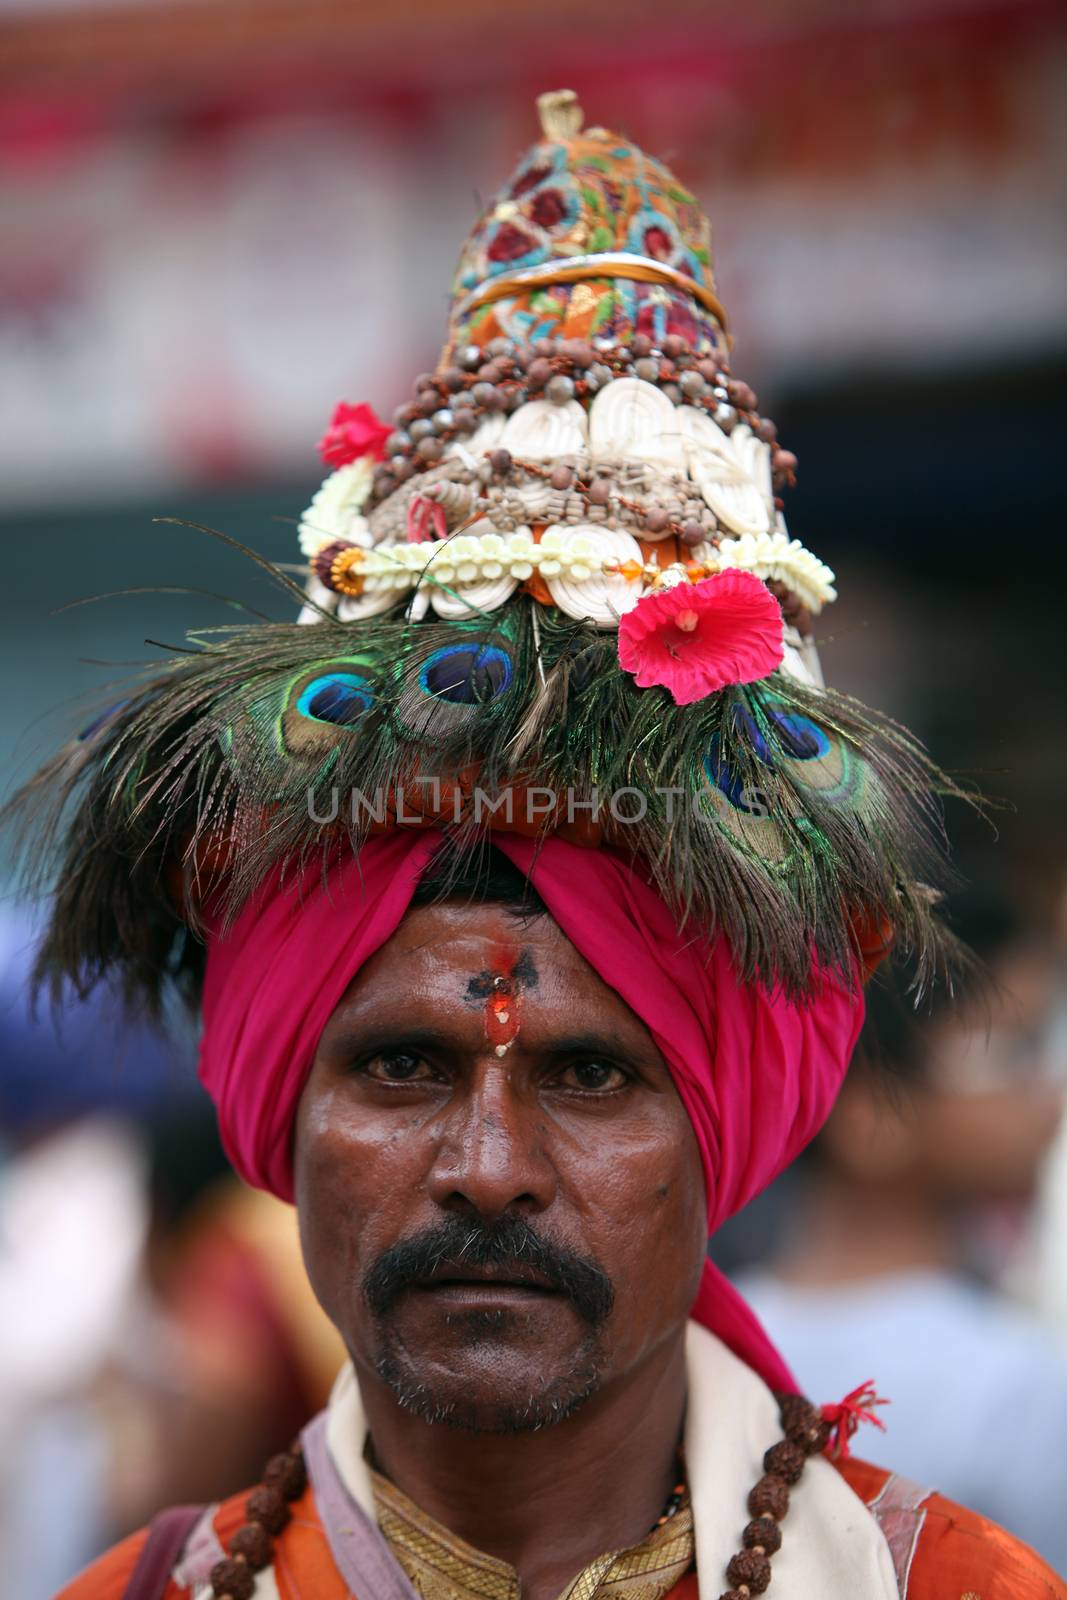 Pune, India - July 11, 2015: A portrait of a Vasudev, pilgrims who are devotees of Lord Vishnu and wear a conical hat with peacock feathers. Vasudev has been a traditional since many years in Maharashtra. THese pilgrims go around singing praises of Lord Vishnu.